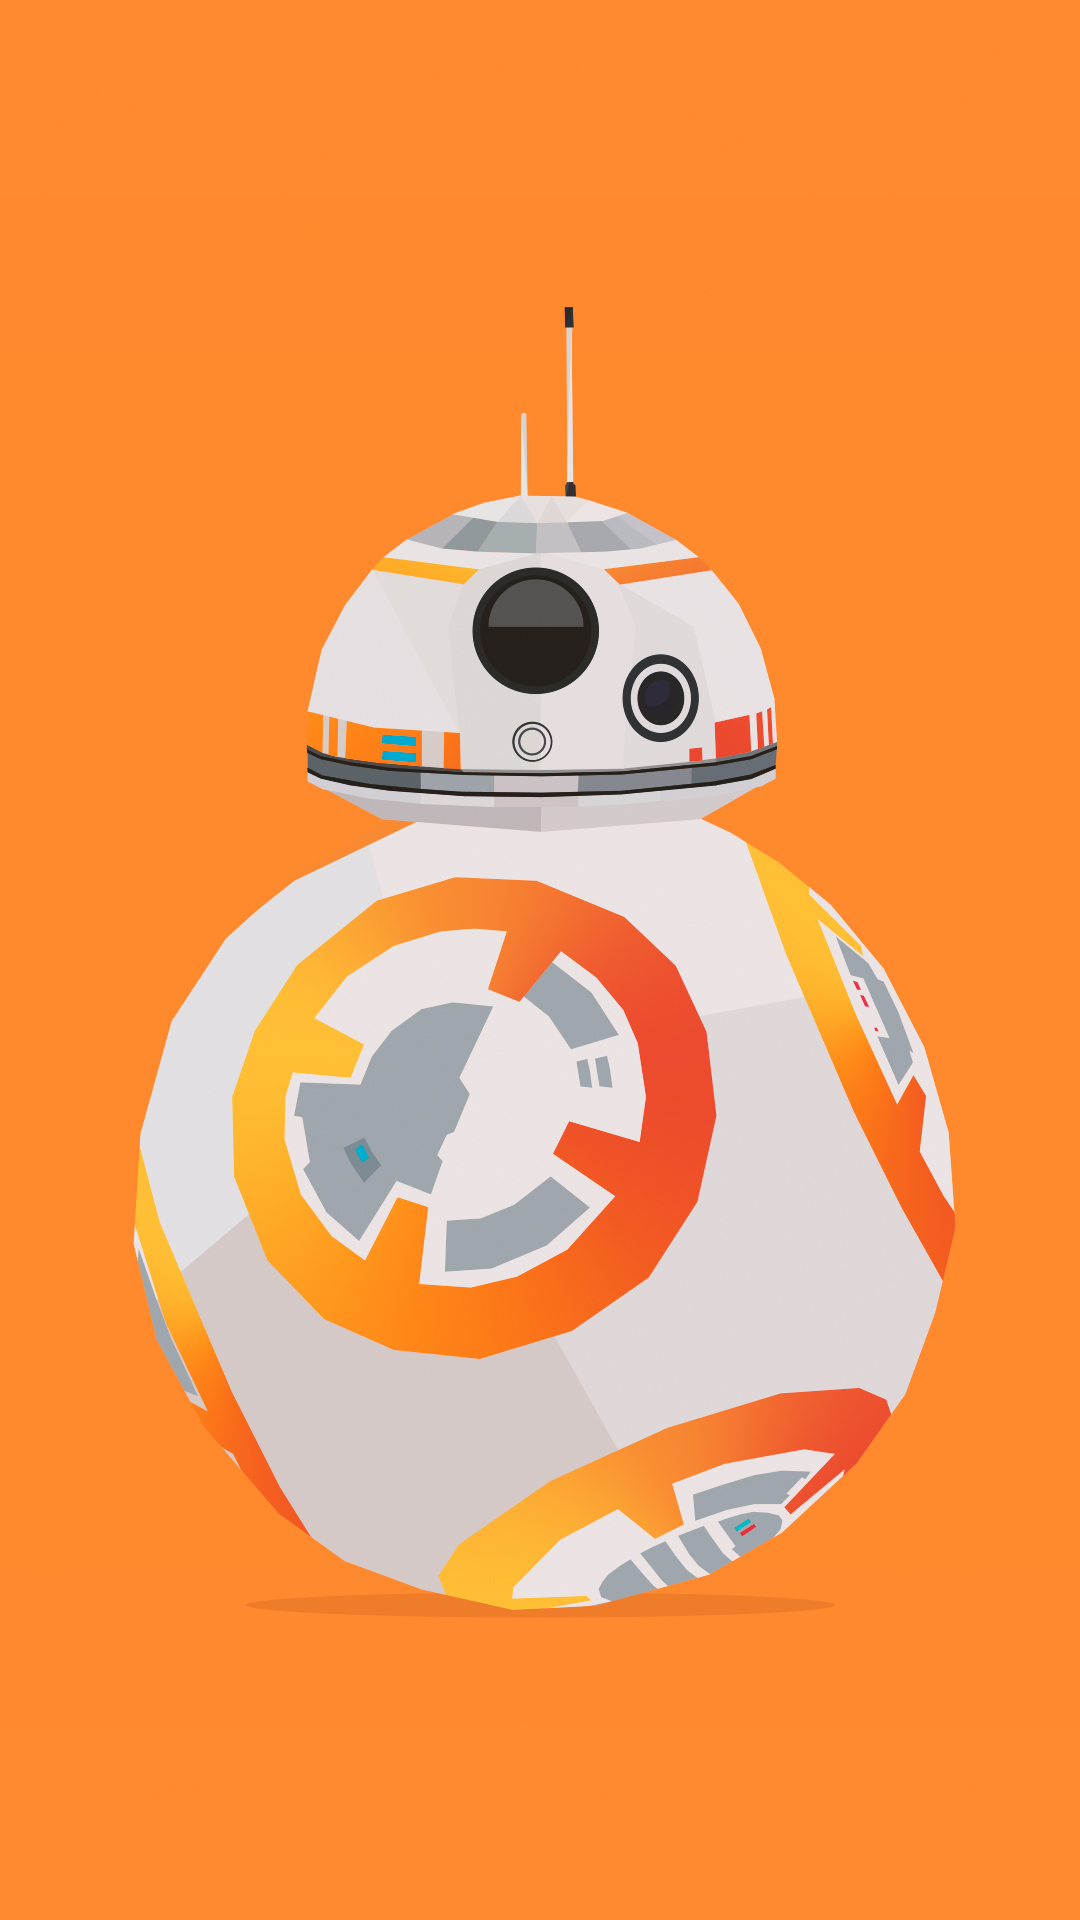 Star Wars Illustration Iphone Wallpapers